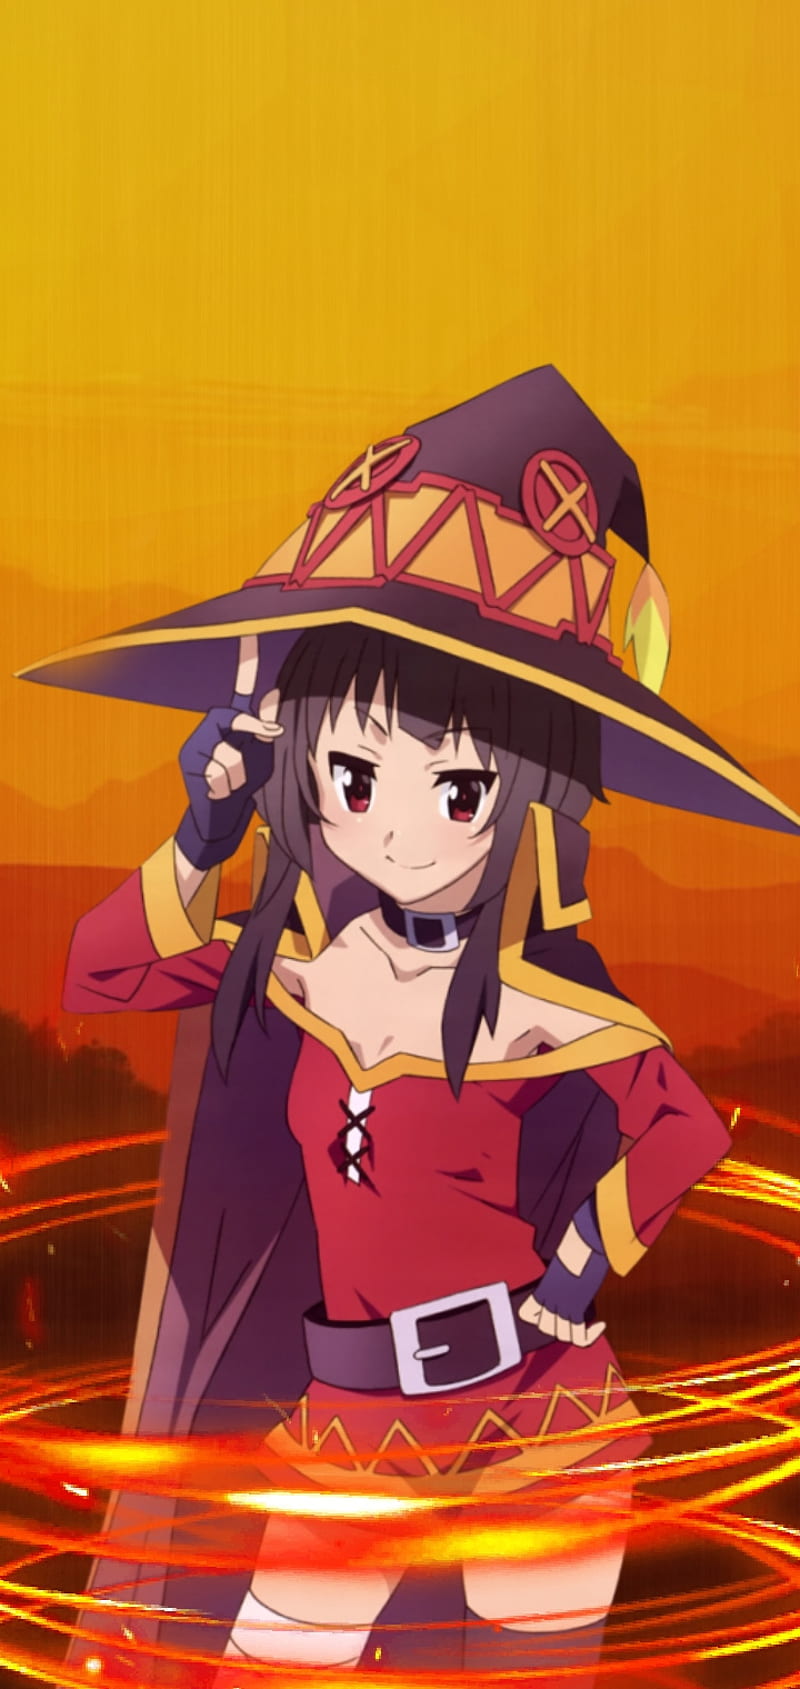 One Day Megumin Will Join the Hero's Party | KONOSUBA - An Explosion on  This Wonderful World! | party | Megumin is stuck in her own world... (via  Konosuba) | By CrunchyrollFacebook